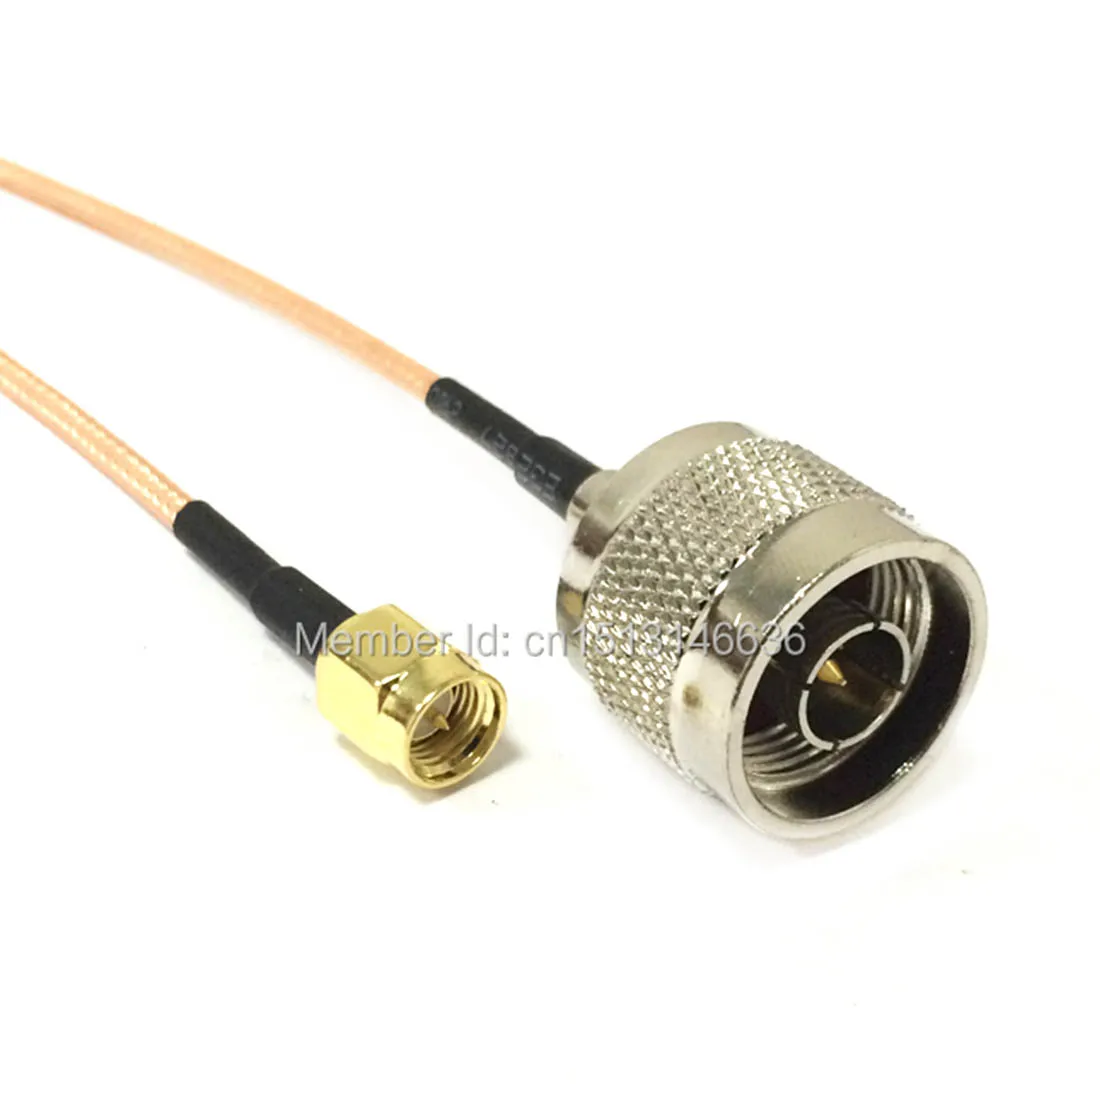 New Wireless Modem Cable SMA Male Plug to N Male Plug RG316 Coaxial Cable 15cm 6inch Pigtail